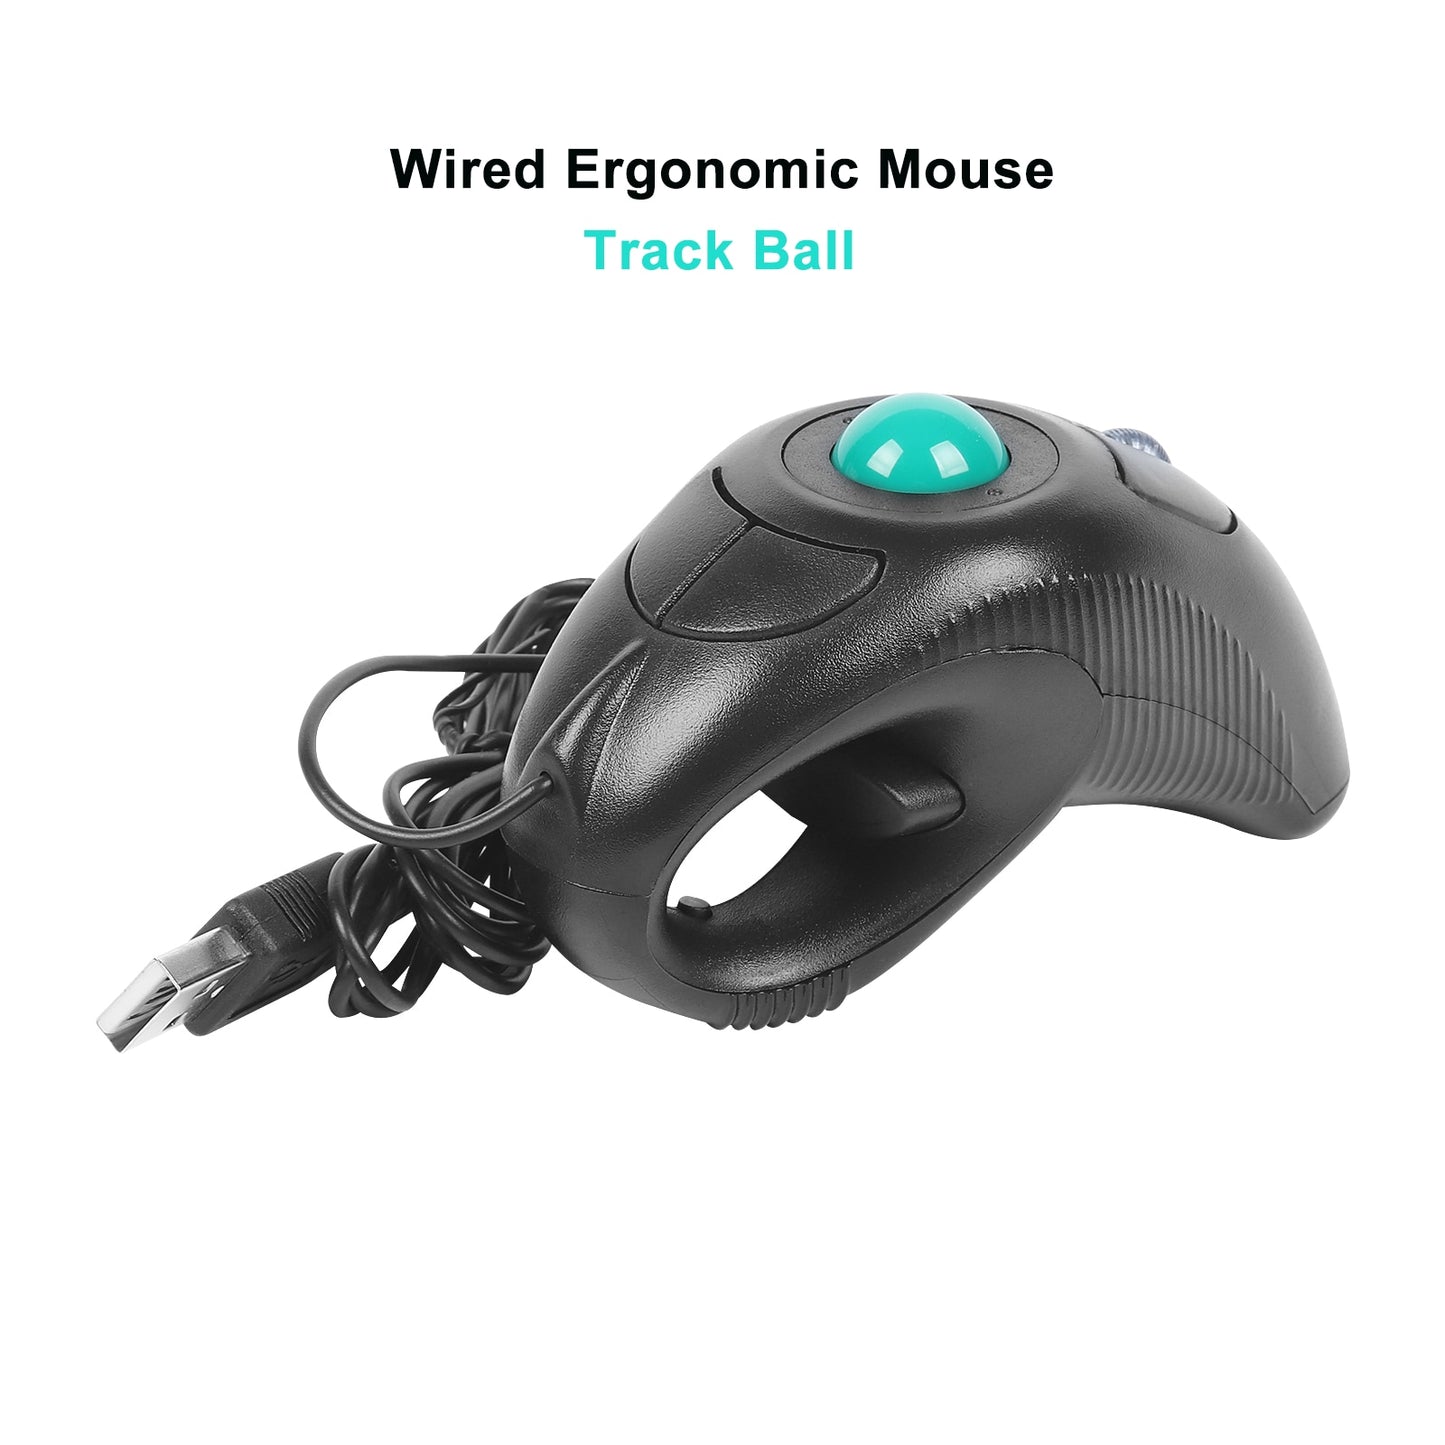 Wireless Trackball Mouse 2.4GHz Thumb-Controlled